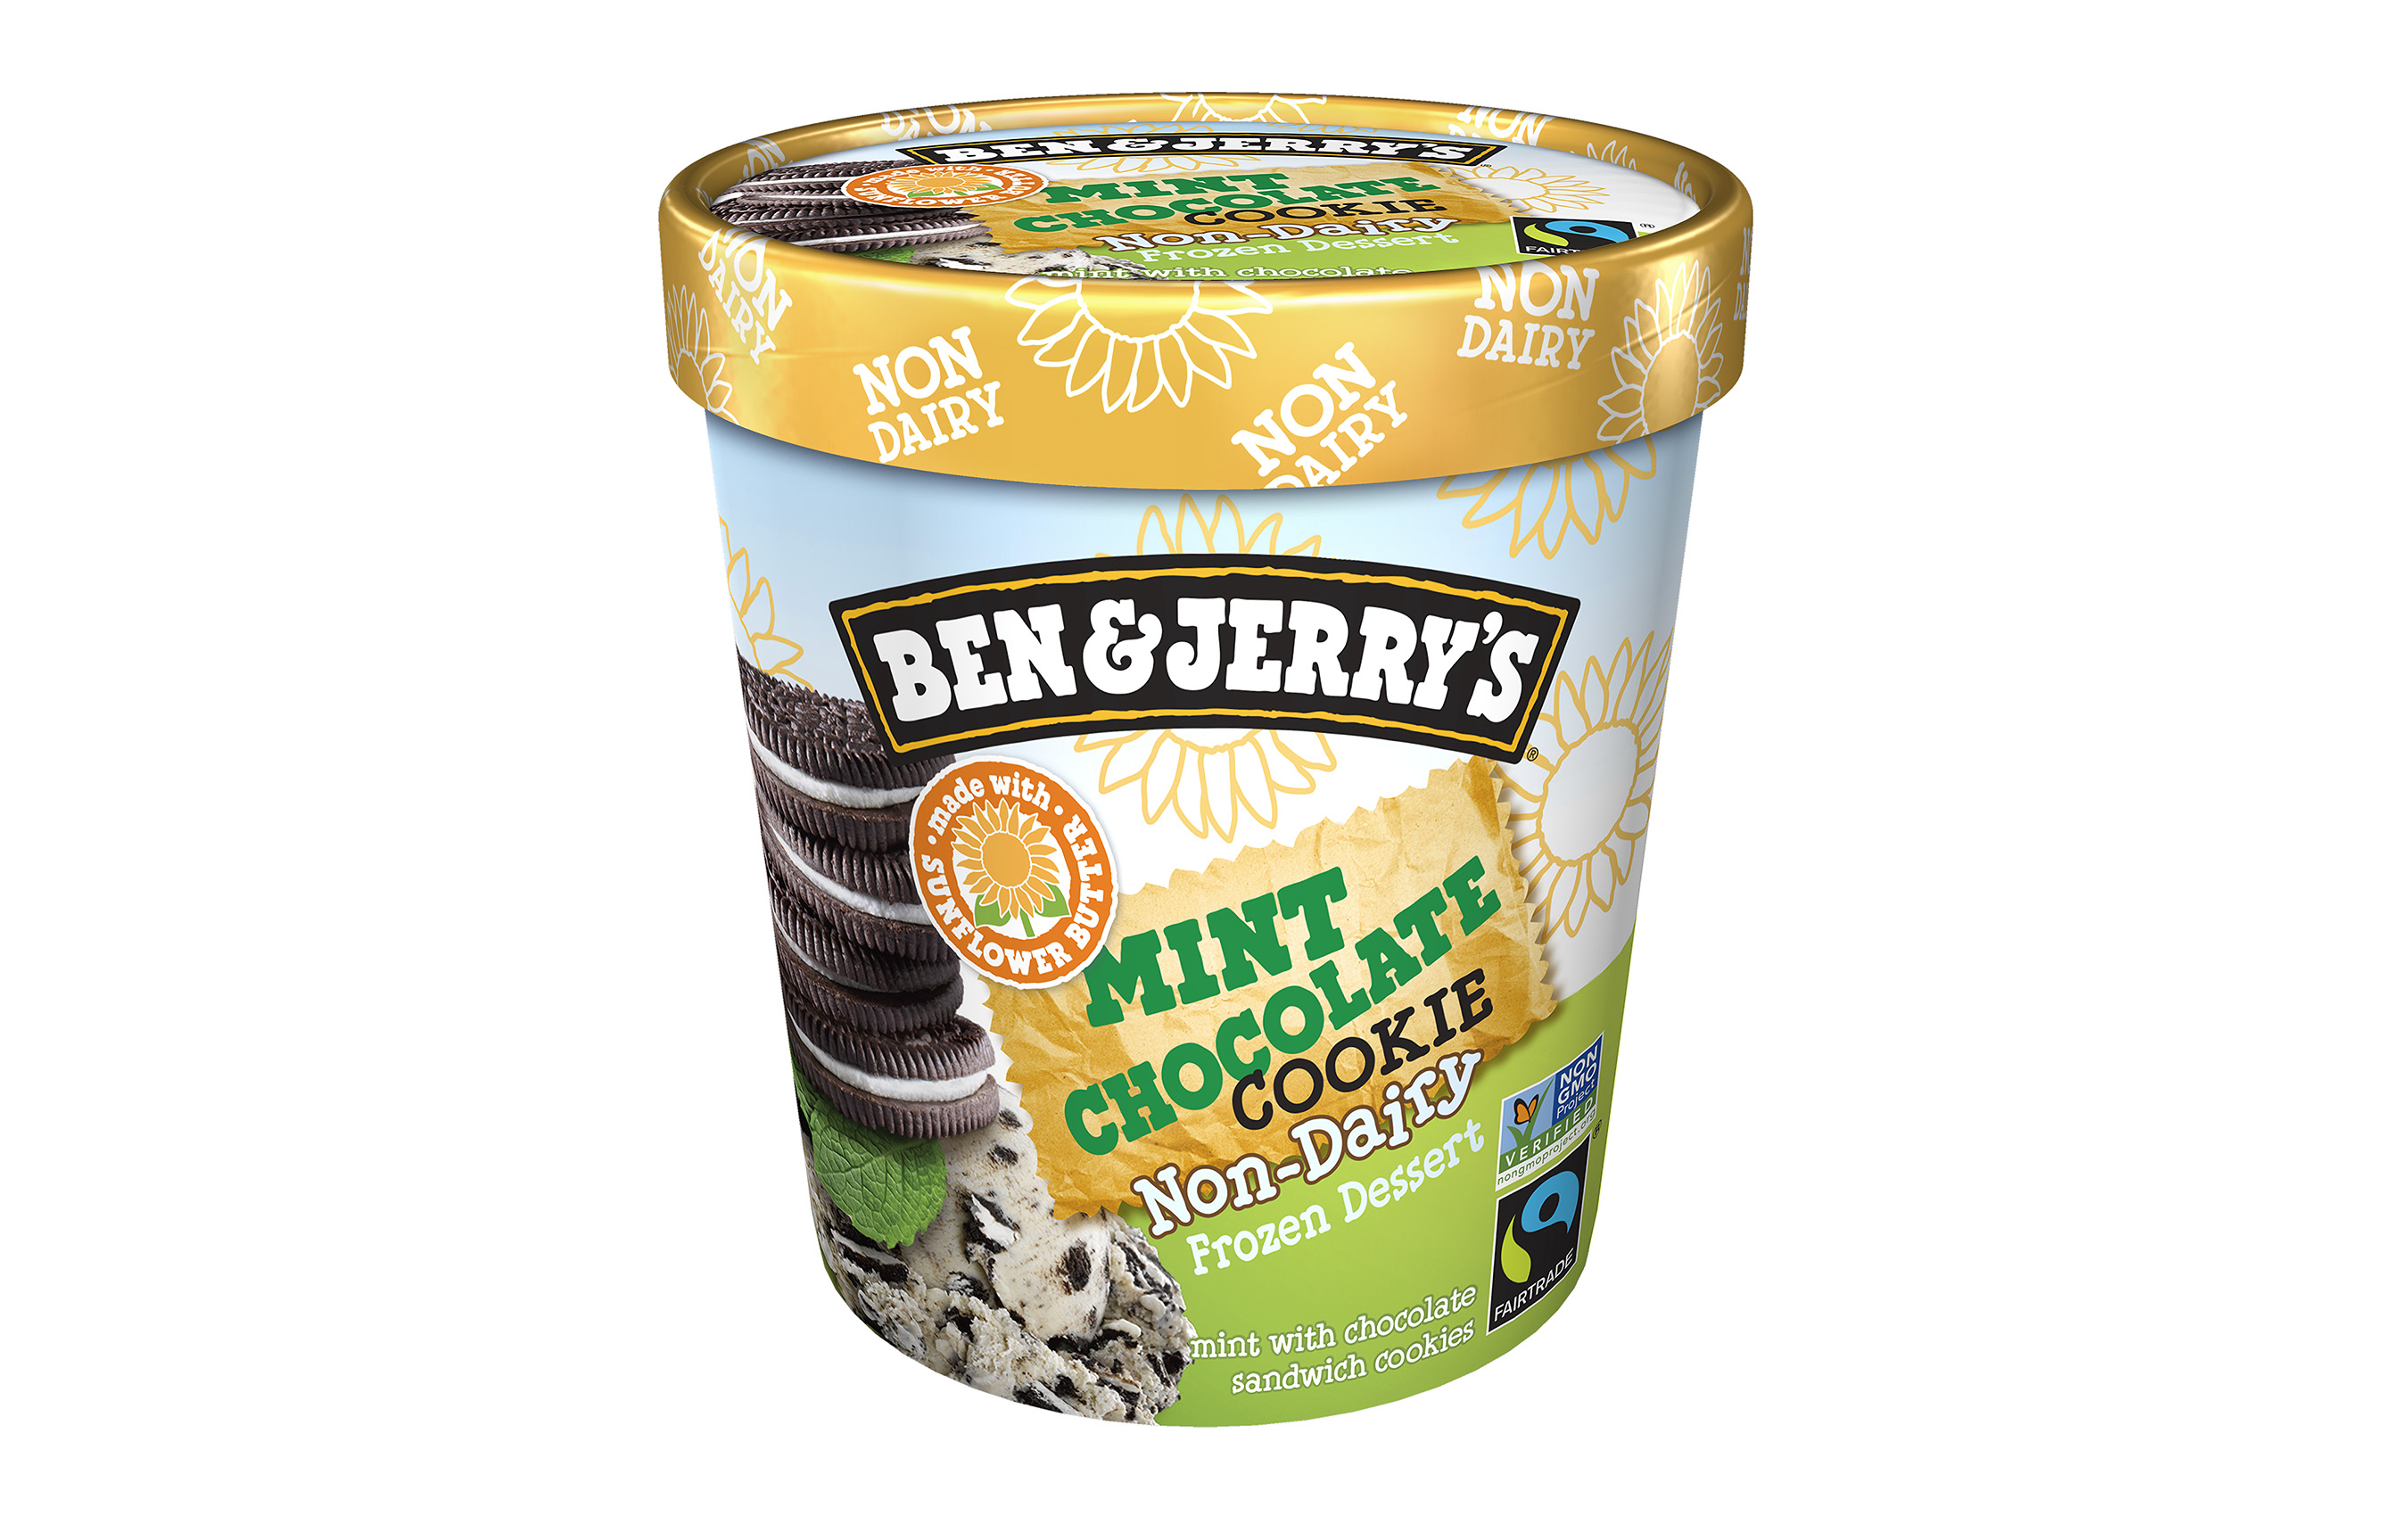 Ben & Jerry’s launches sunflower butter based Mint Chocolate Cookie, a mint non-dairy frozen dessert with chocolate sandwich cookies.